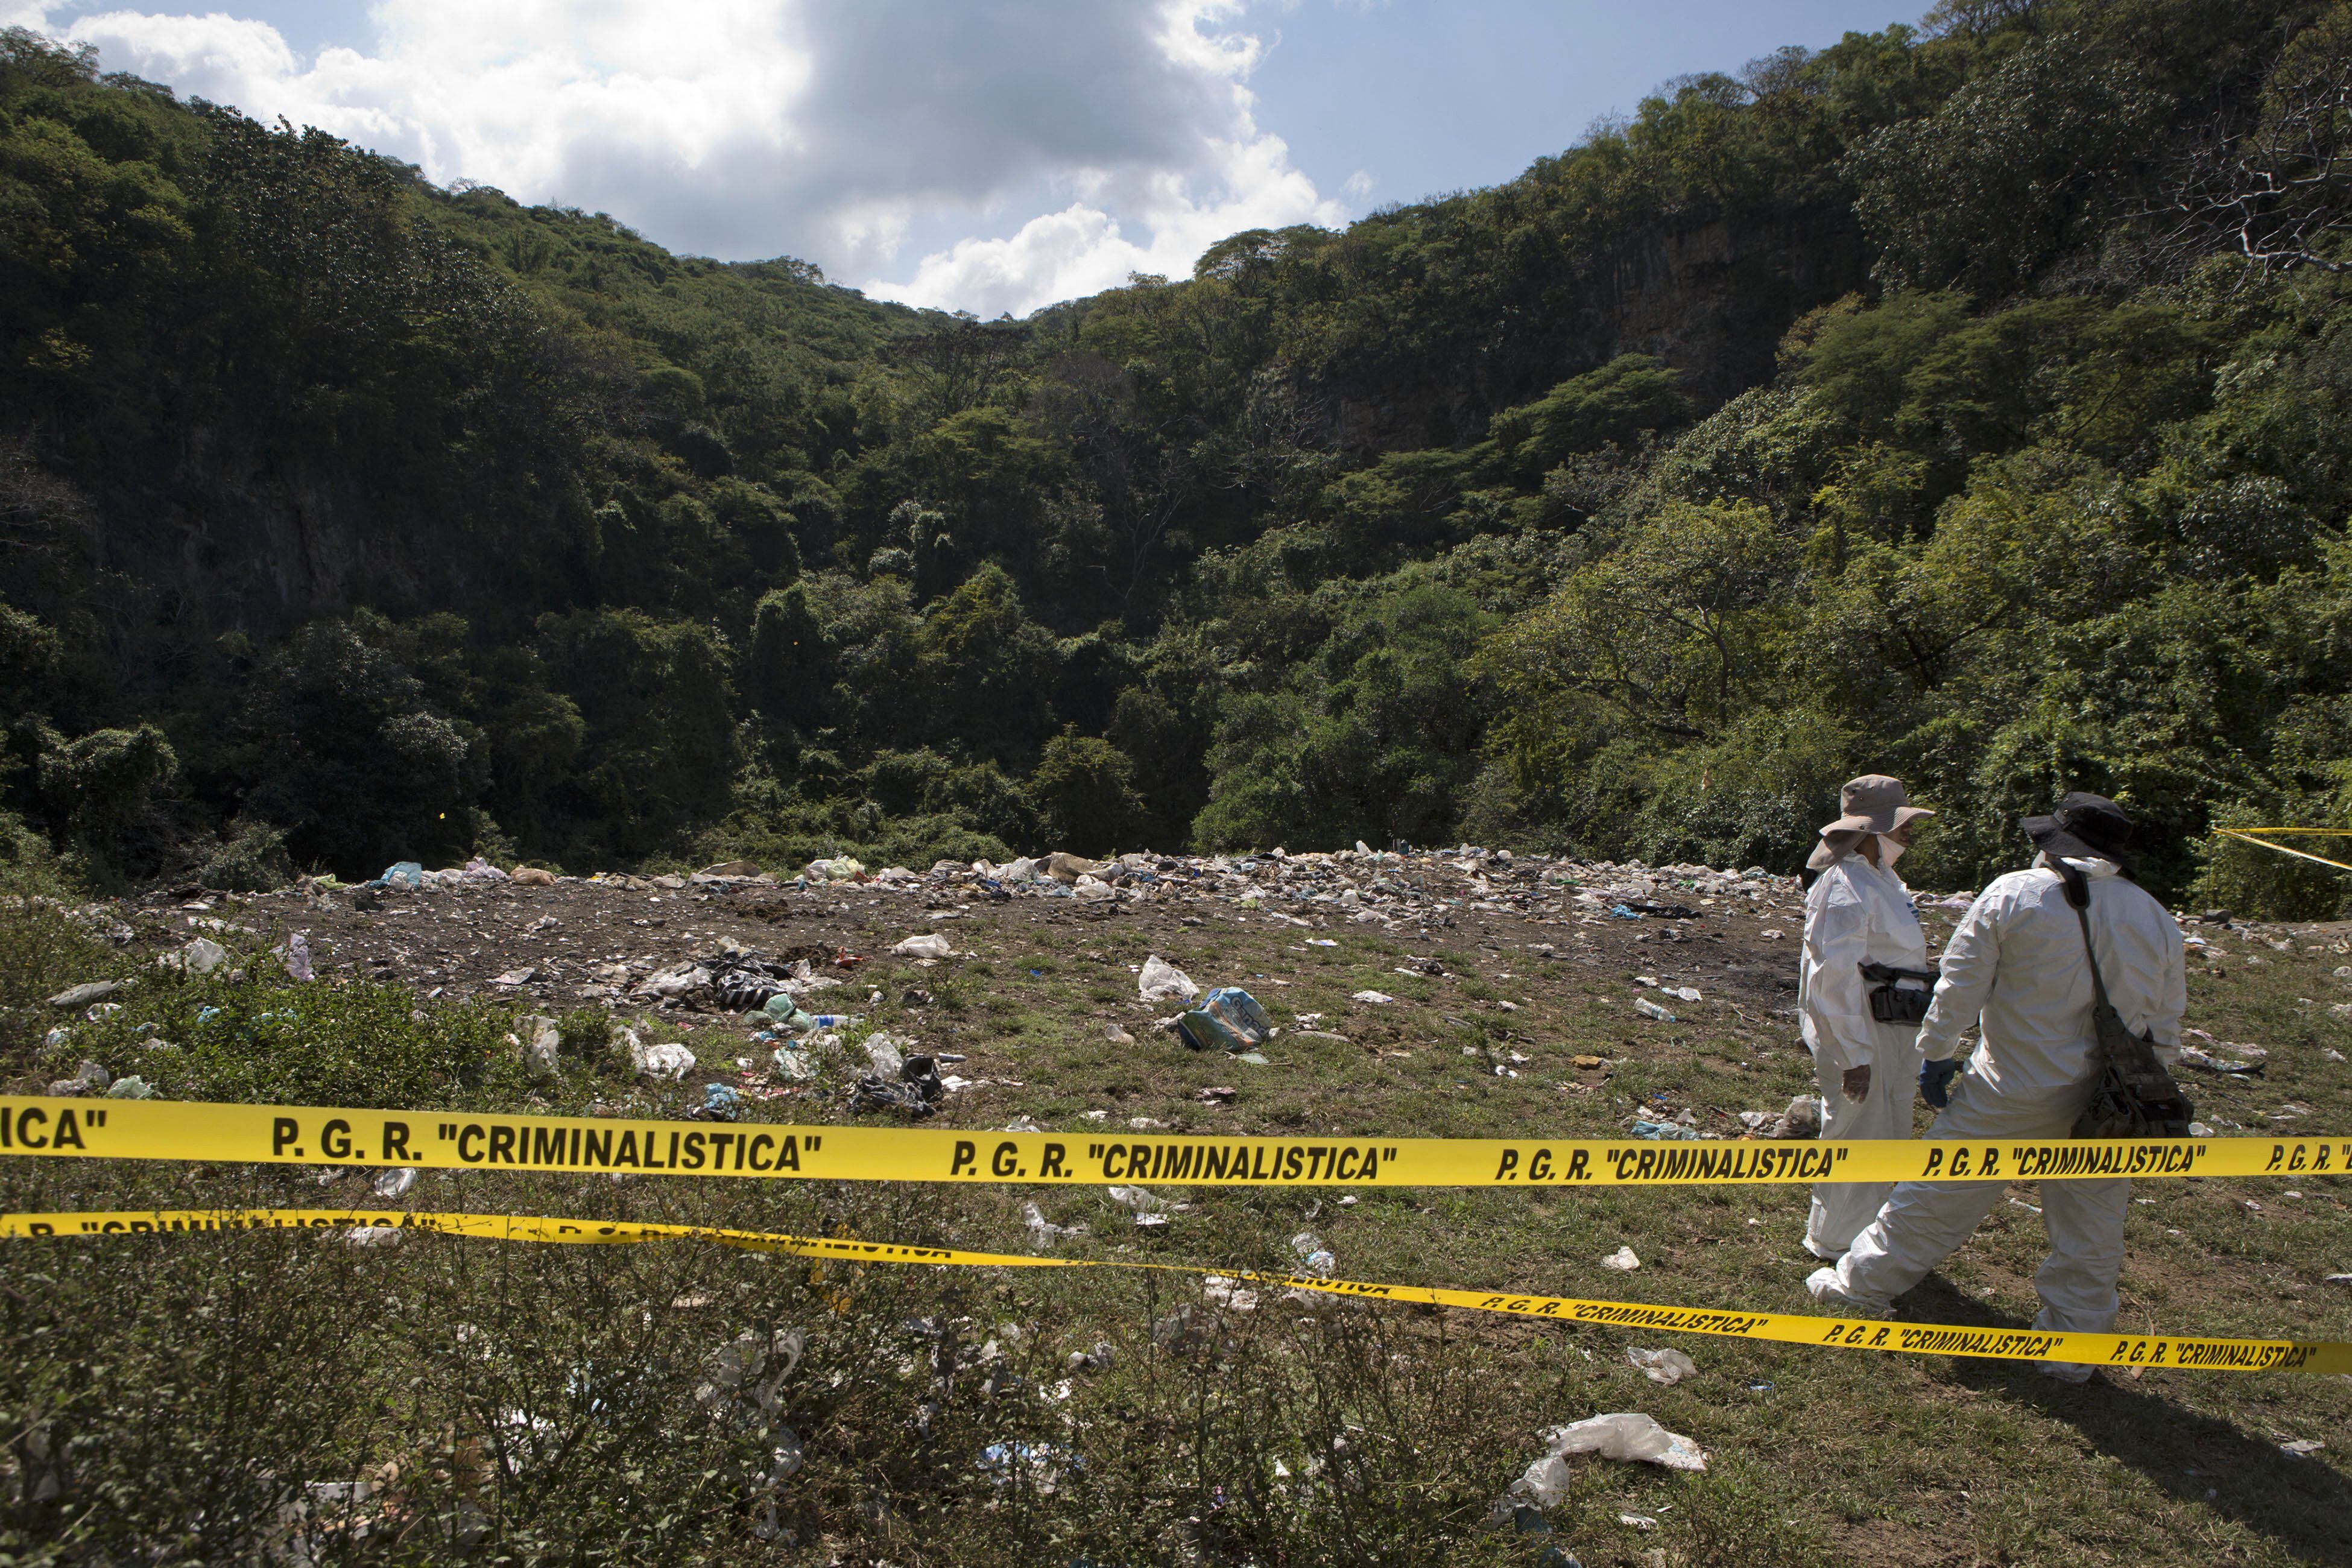 Forensics work at the Cocula garbage dump, on October 28, 2014. (AFP PHOTO / POOL / Rebecca Blackwell).